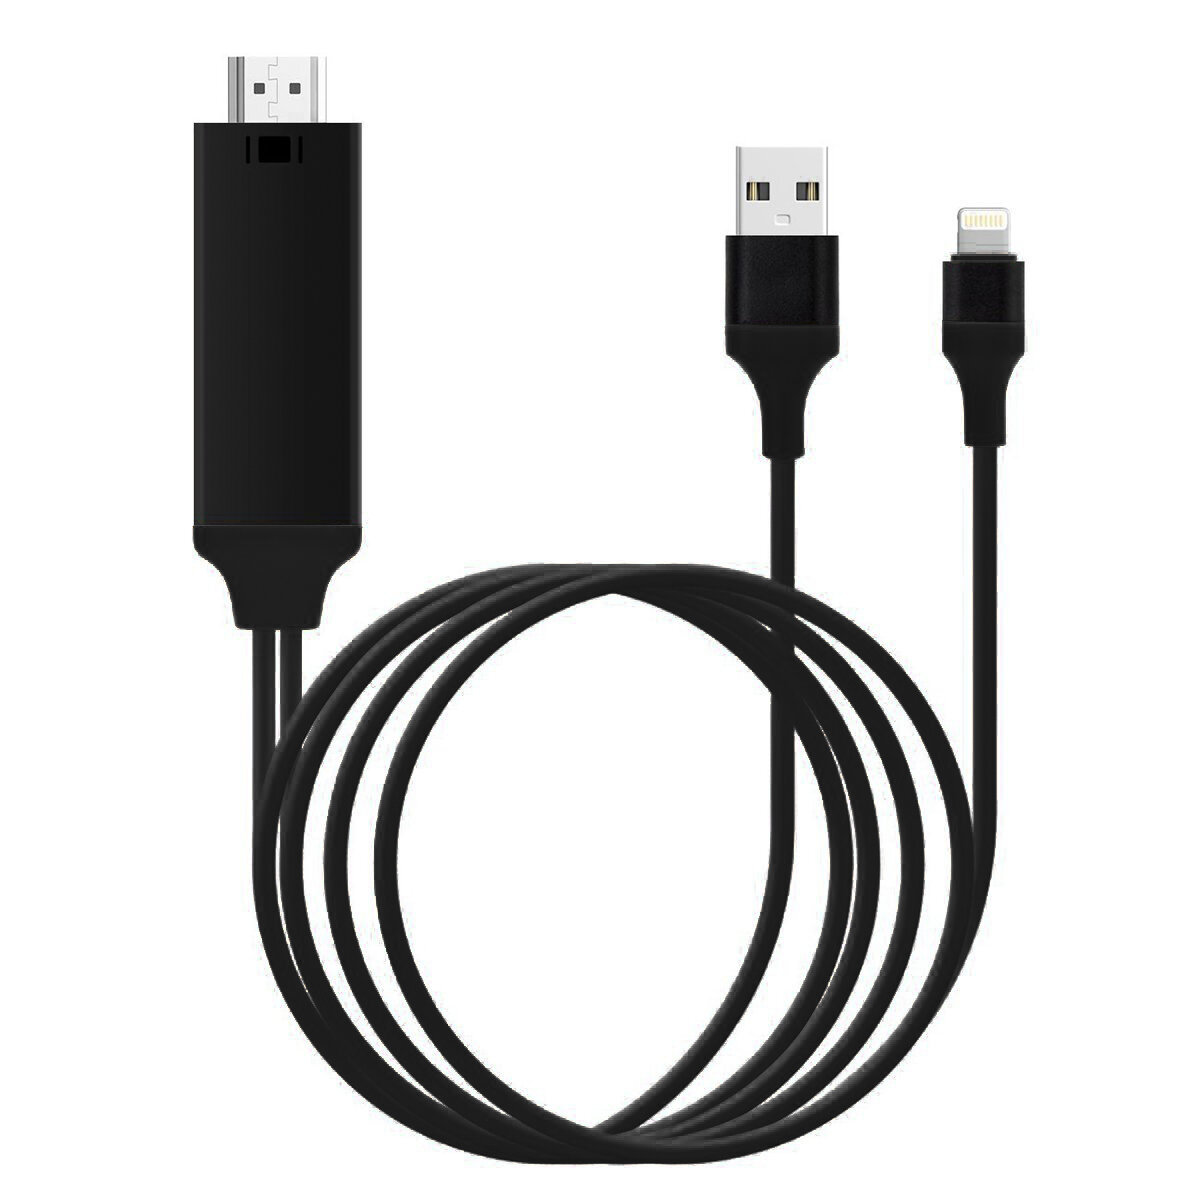 iP Port/USB to 4K HD Display Port Cable for iPhone/for iPad/for iPod Audio/Video/Files Transfer to Display/Projector/TV